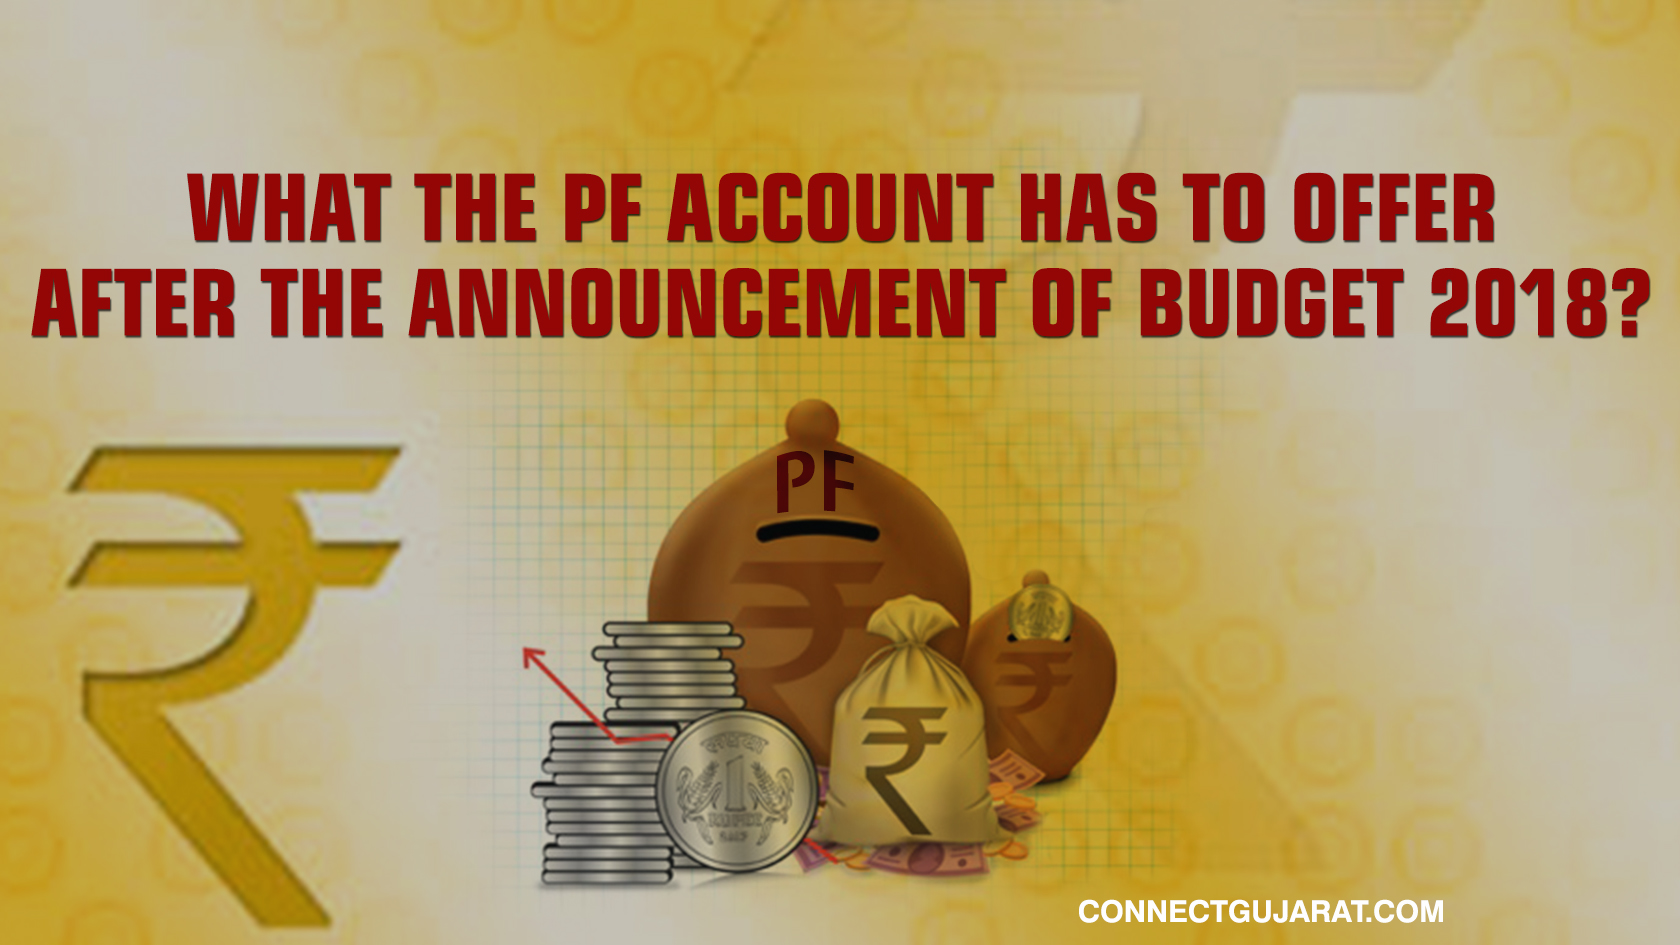 What the PF account has to offer after the announcement of Budget 2018?